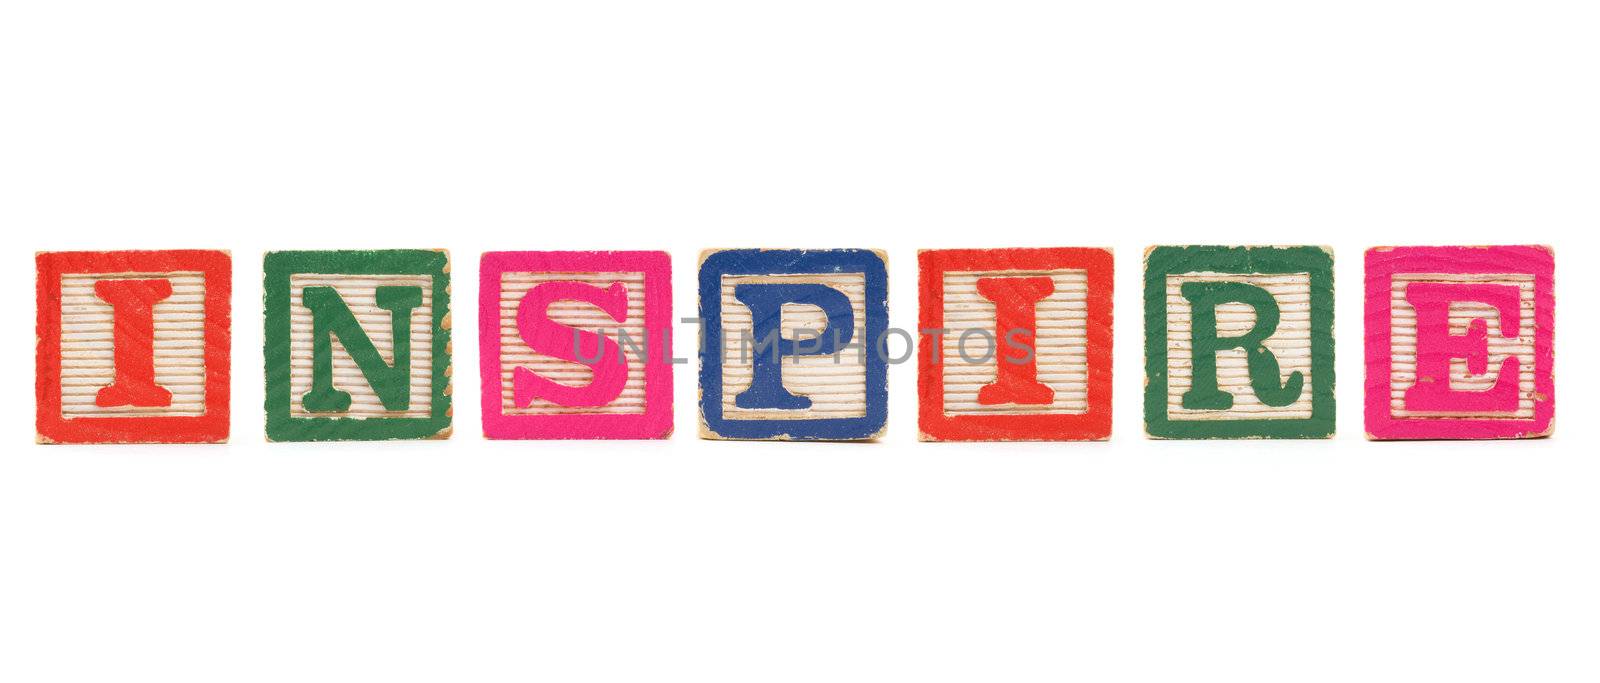 The word "INSPIRE" created with children's blocks